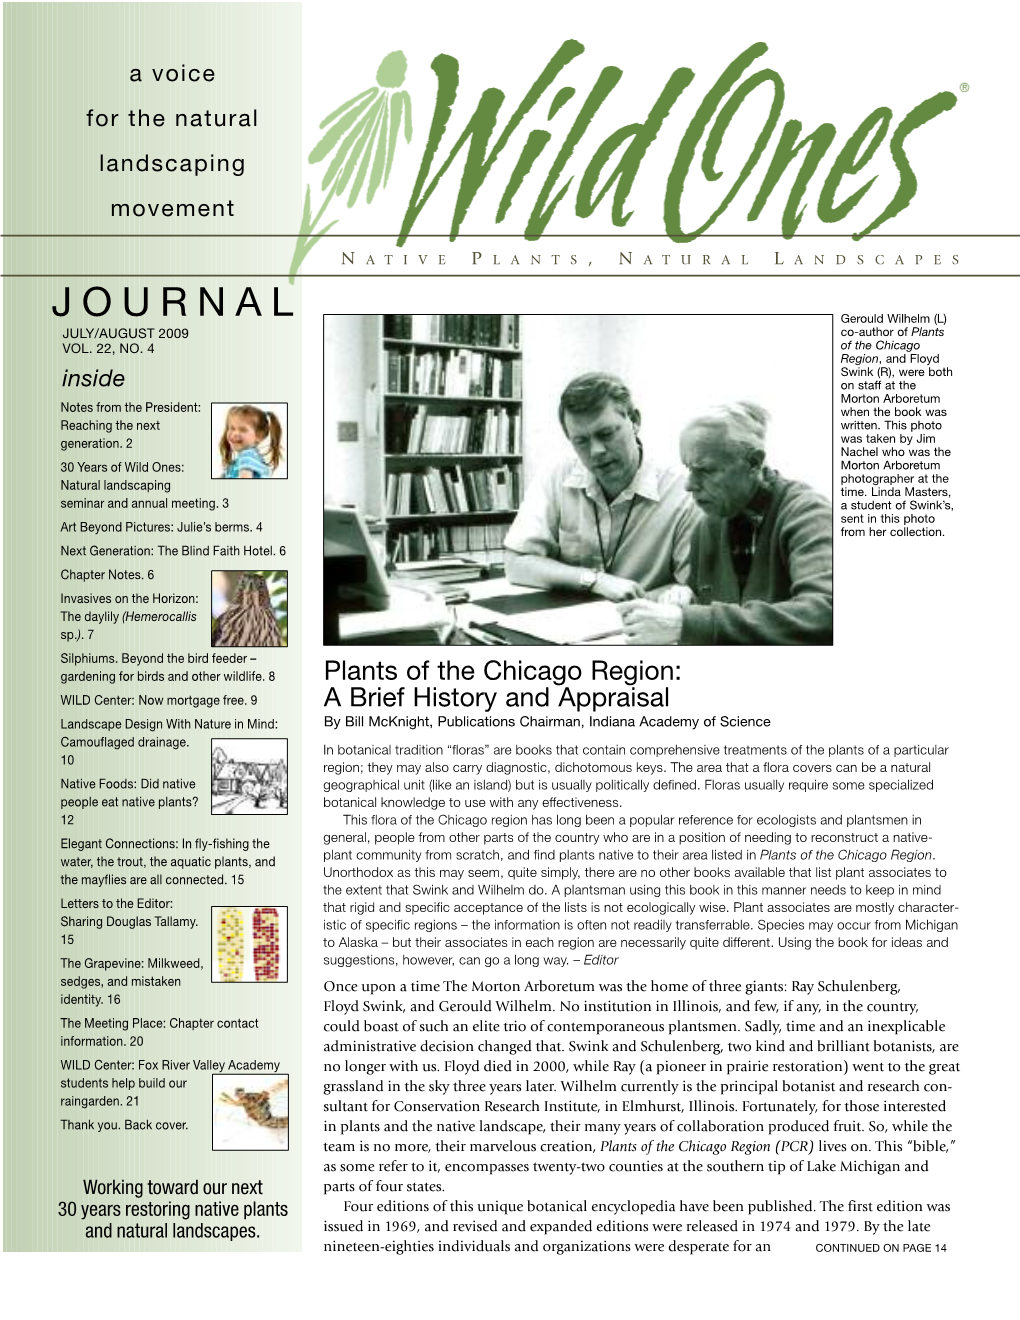 JOURNAL Gerould Wilhelm (L) JULY/AUGUST 2009 Co-Author of Plants VOL